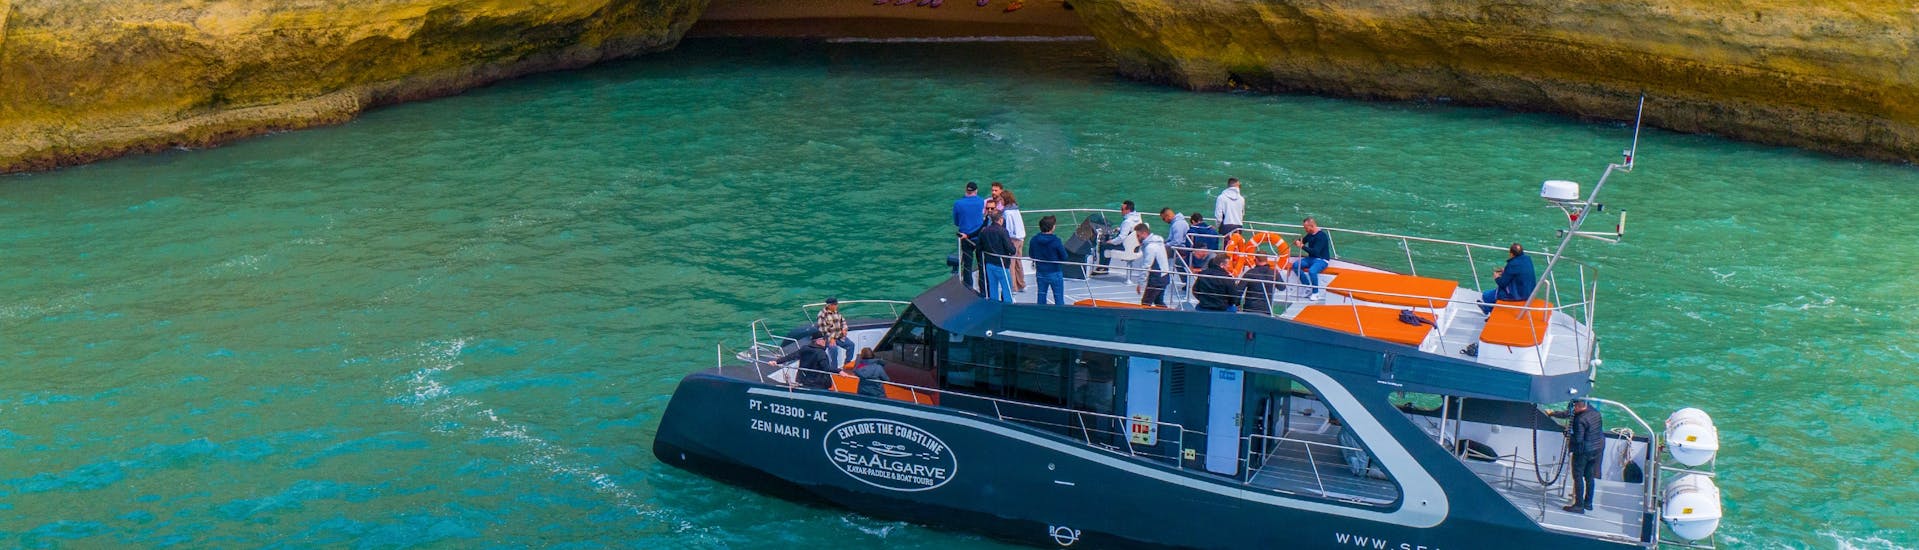 The catamaran operated by SeaAlgarve Albufeira can be seen approaching the Benagil Cave during the Benagil Boat Tour.